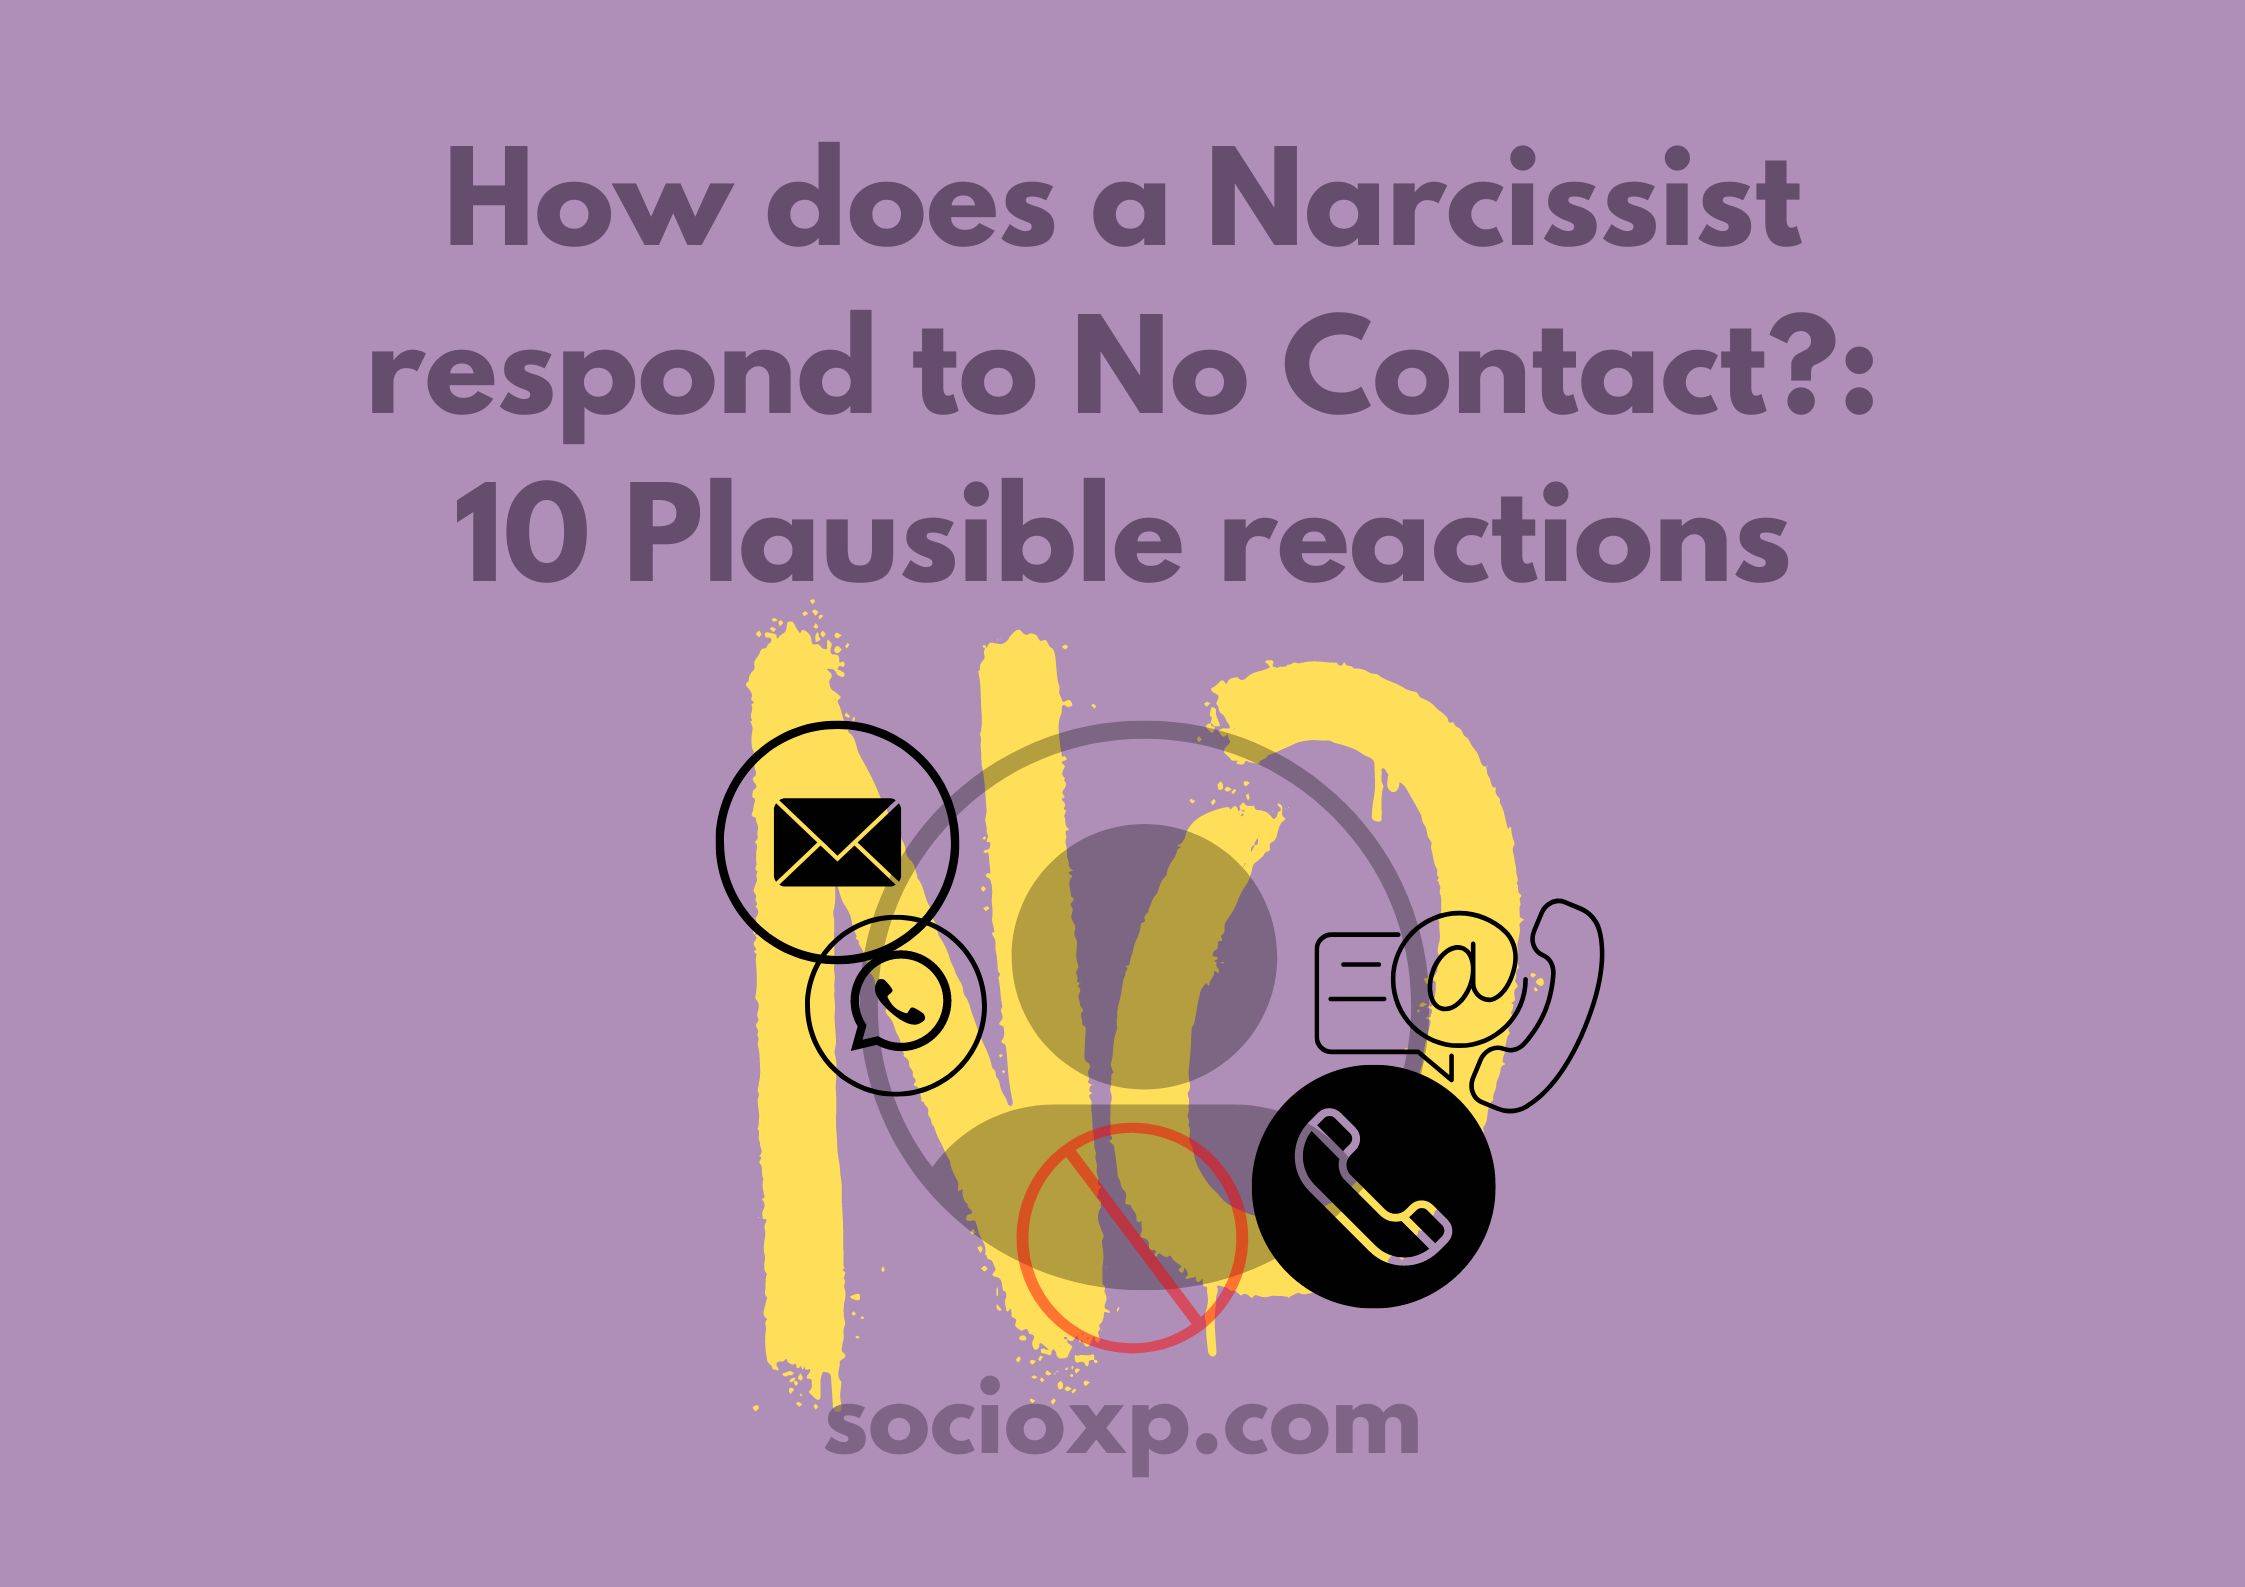 How does a Narcissist respond to No Contact?: 10 Plausible reactions